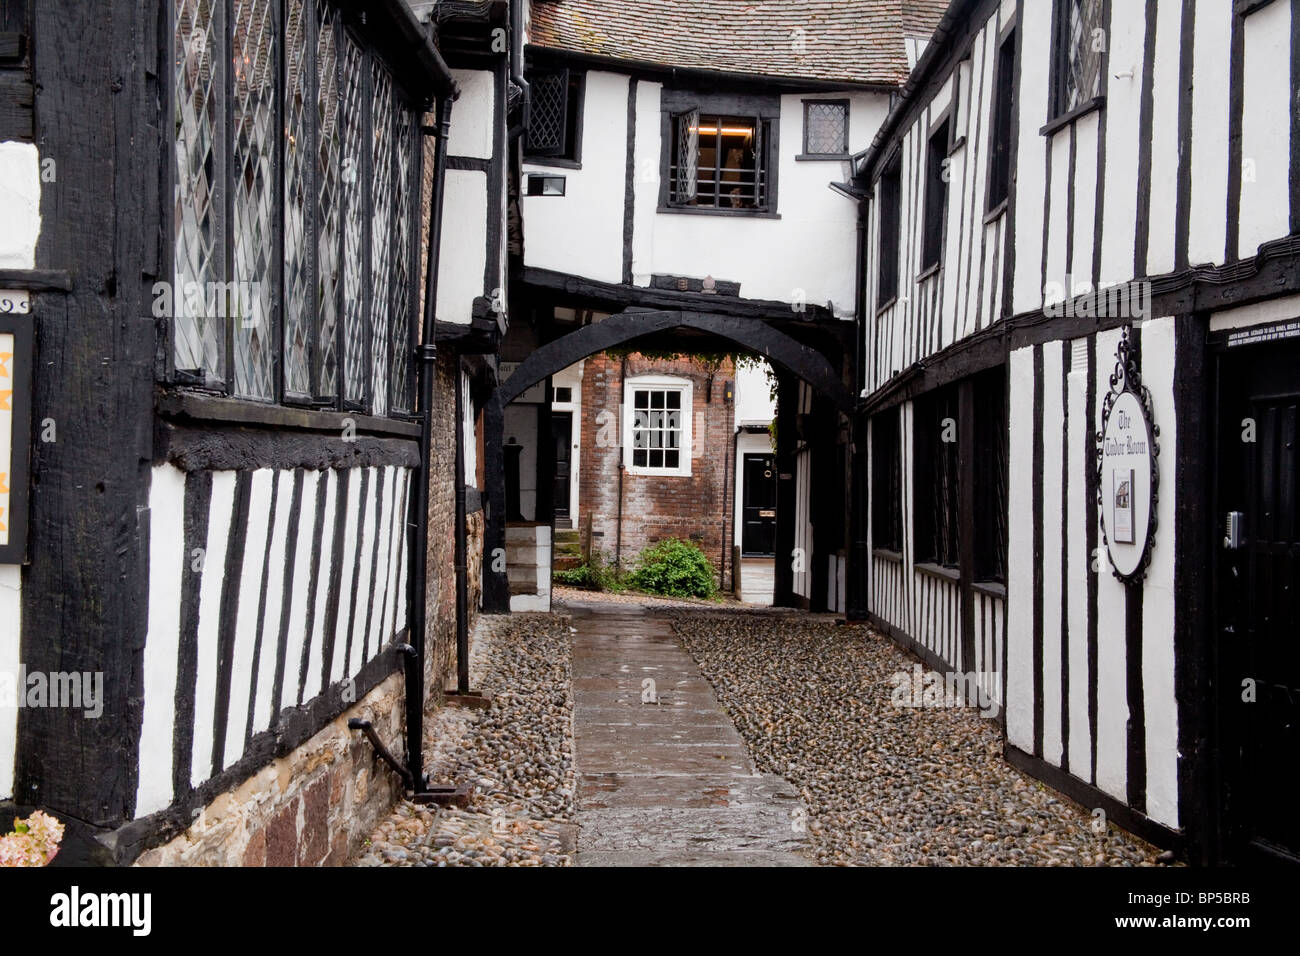 Yard of an old coaching inn in Rye Sussex with half-timbered houses Stock Photo